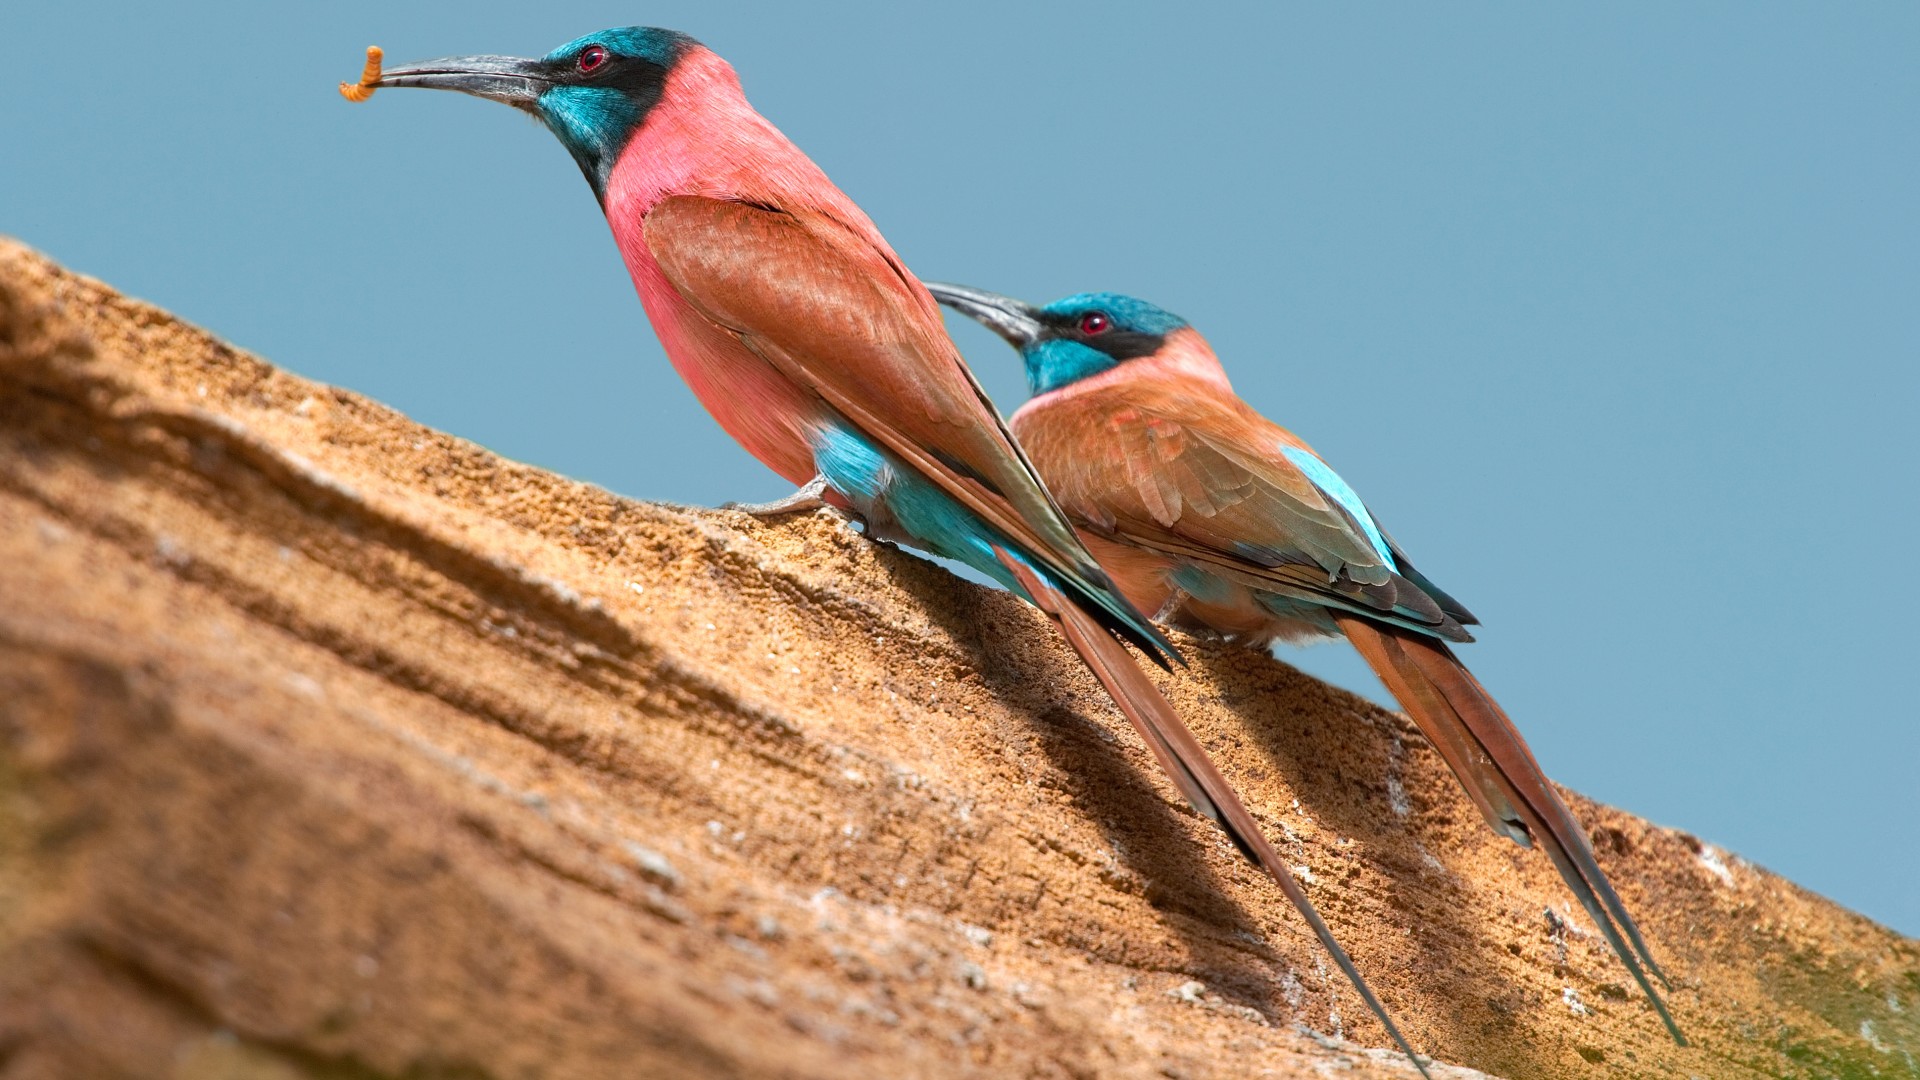 Northern carmine bee-eater, Central African Republic, tourism, branch, pink, red, eyes, nature, animal, birds (horizontal)